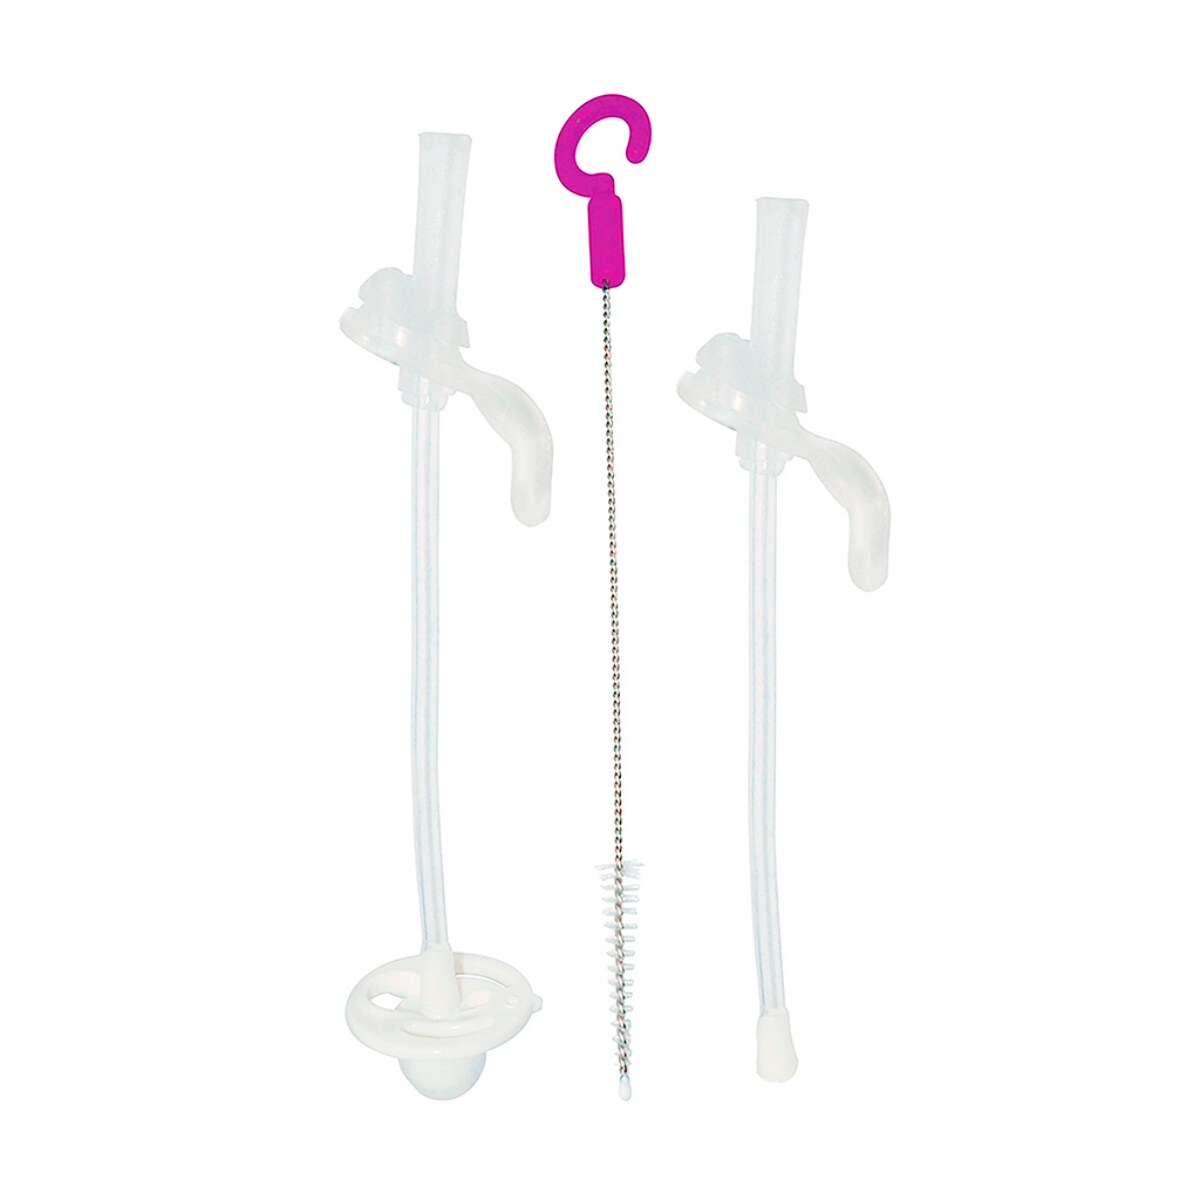 B.Box Sippy Cup Replacement Straw And Cleaning Set (For New Design Cups)